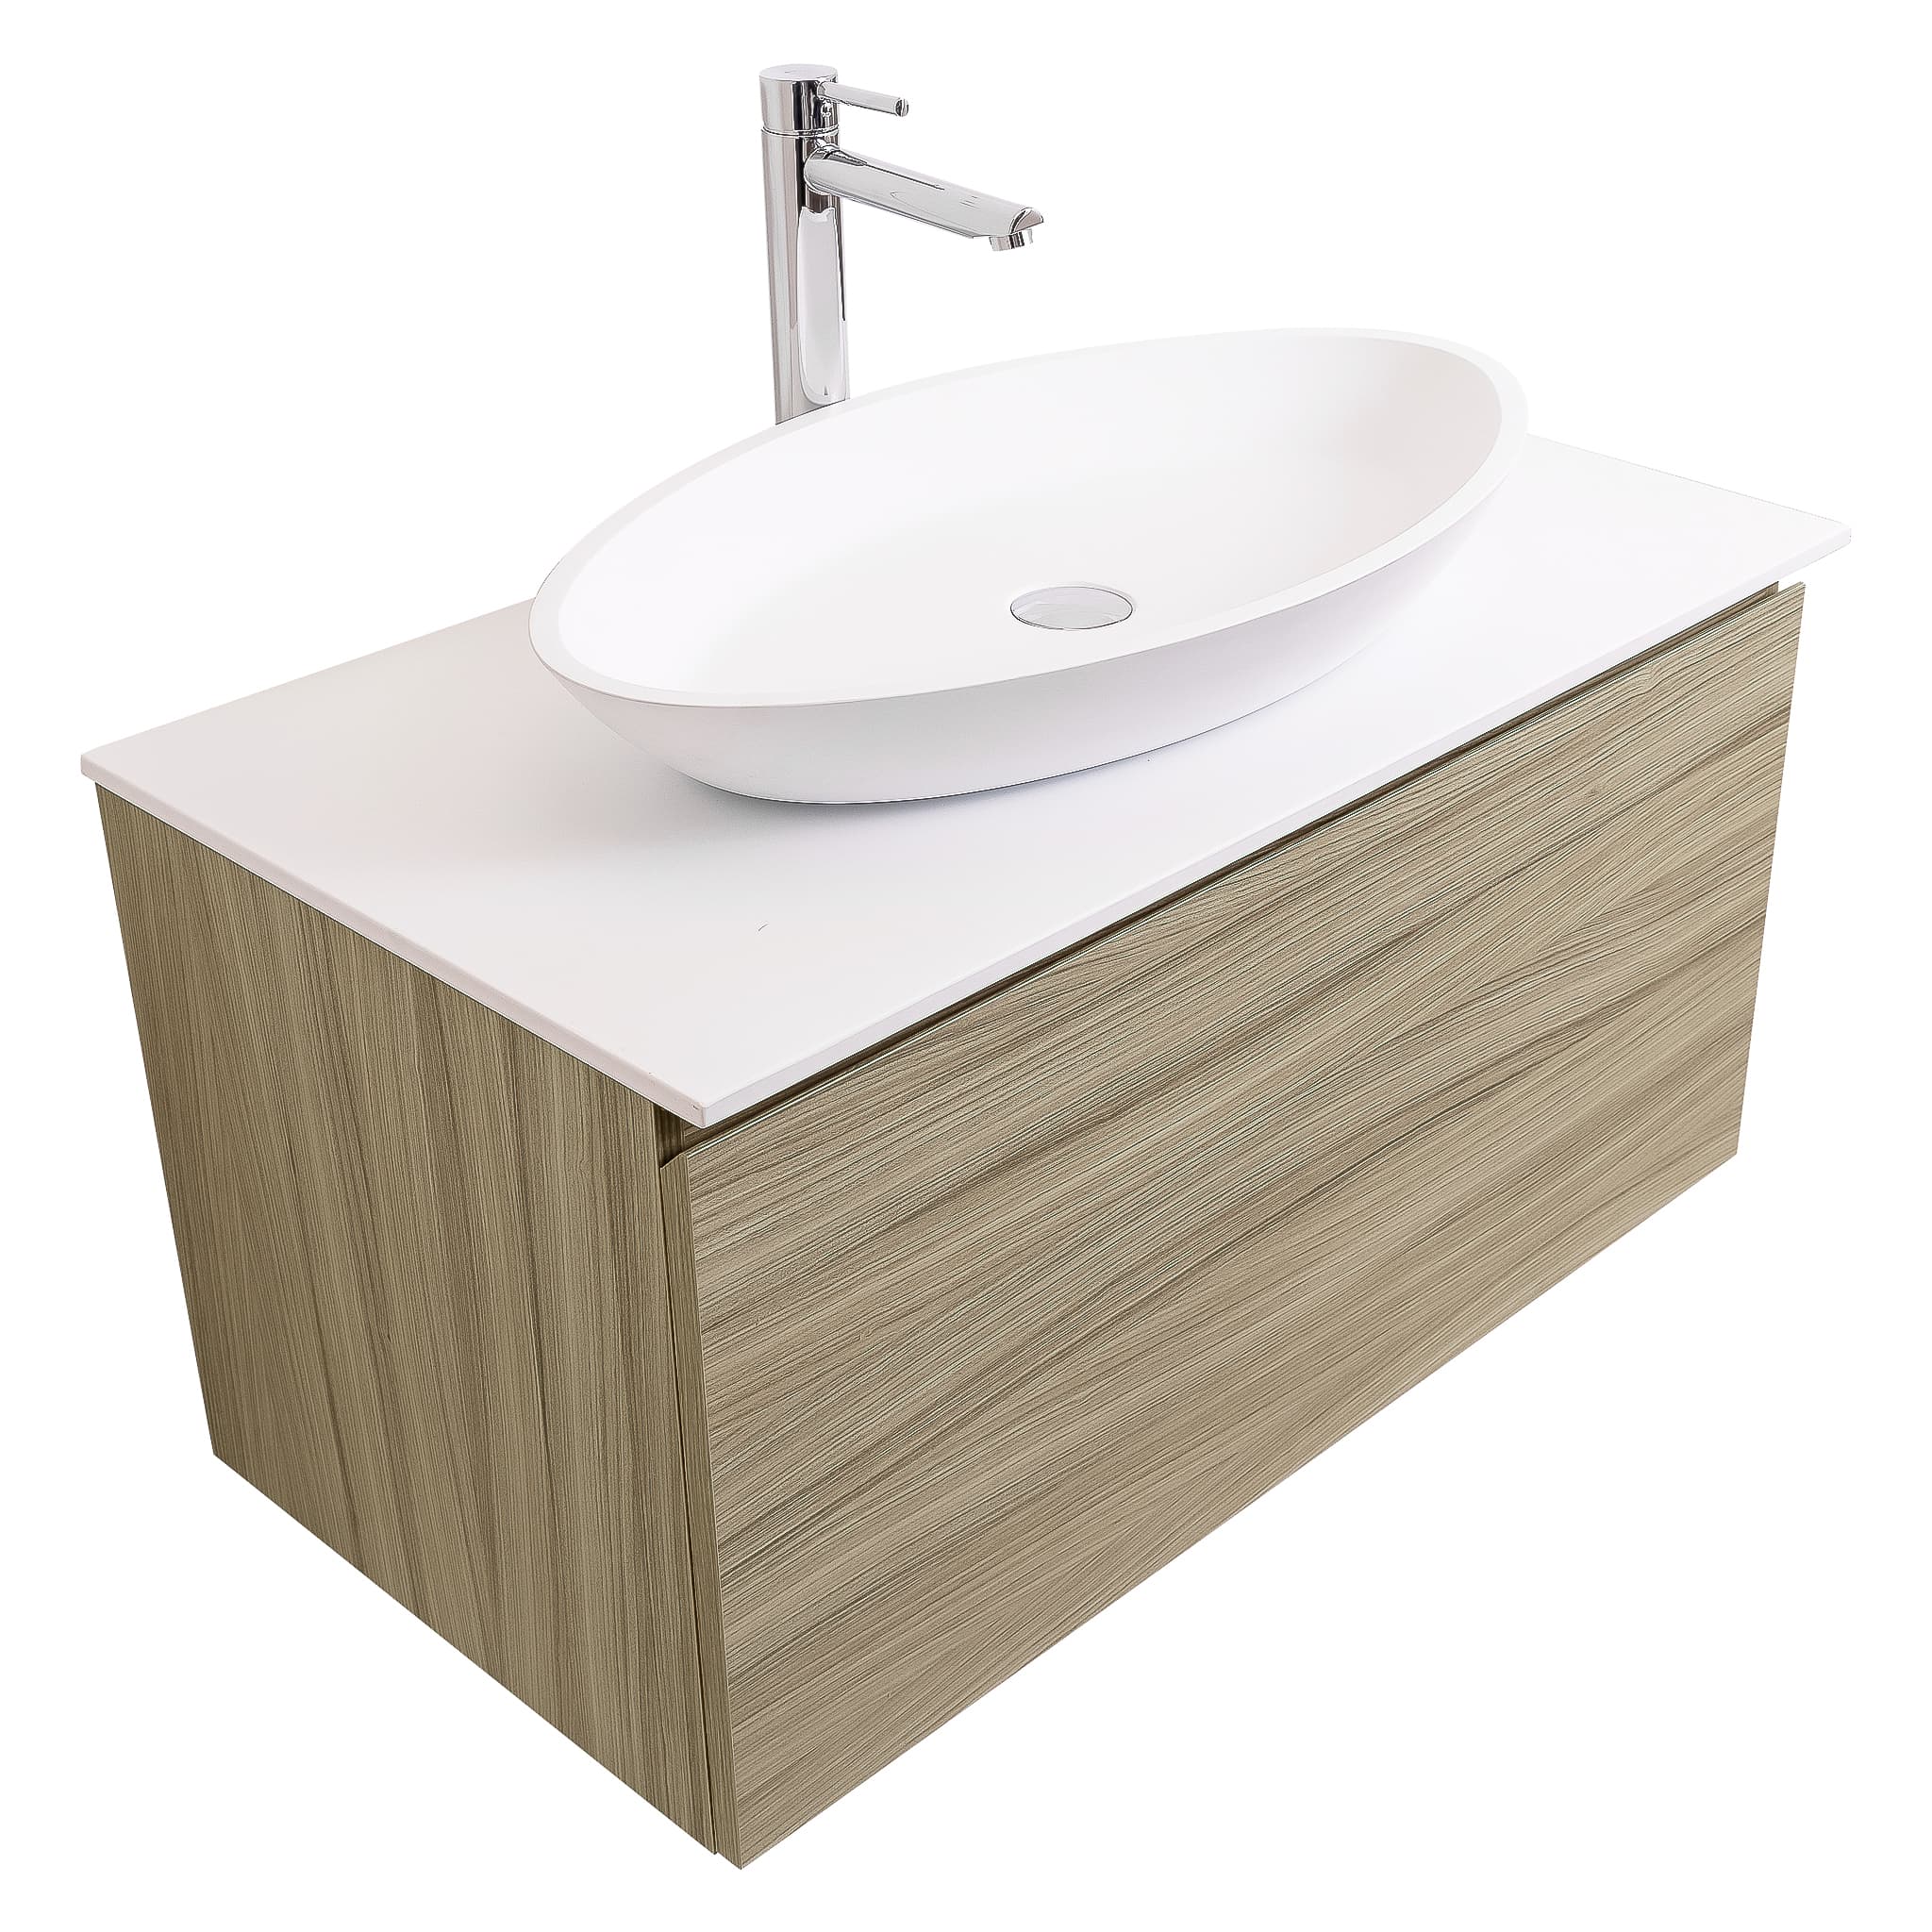 Venice 31.5 Nilo Grey Wood Texture Cabinet, Solid Surface Flat White Counter And Oval Solid Surface White Basin 1305, Wall Mounted Modern Vanity Set